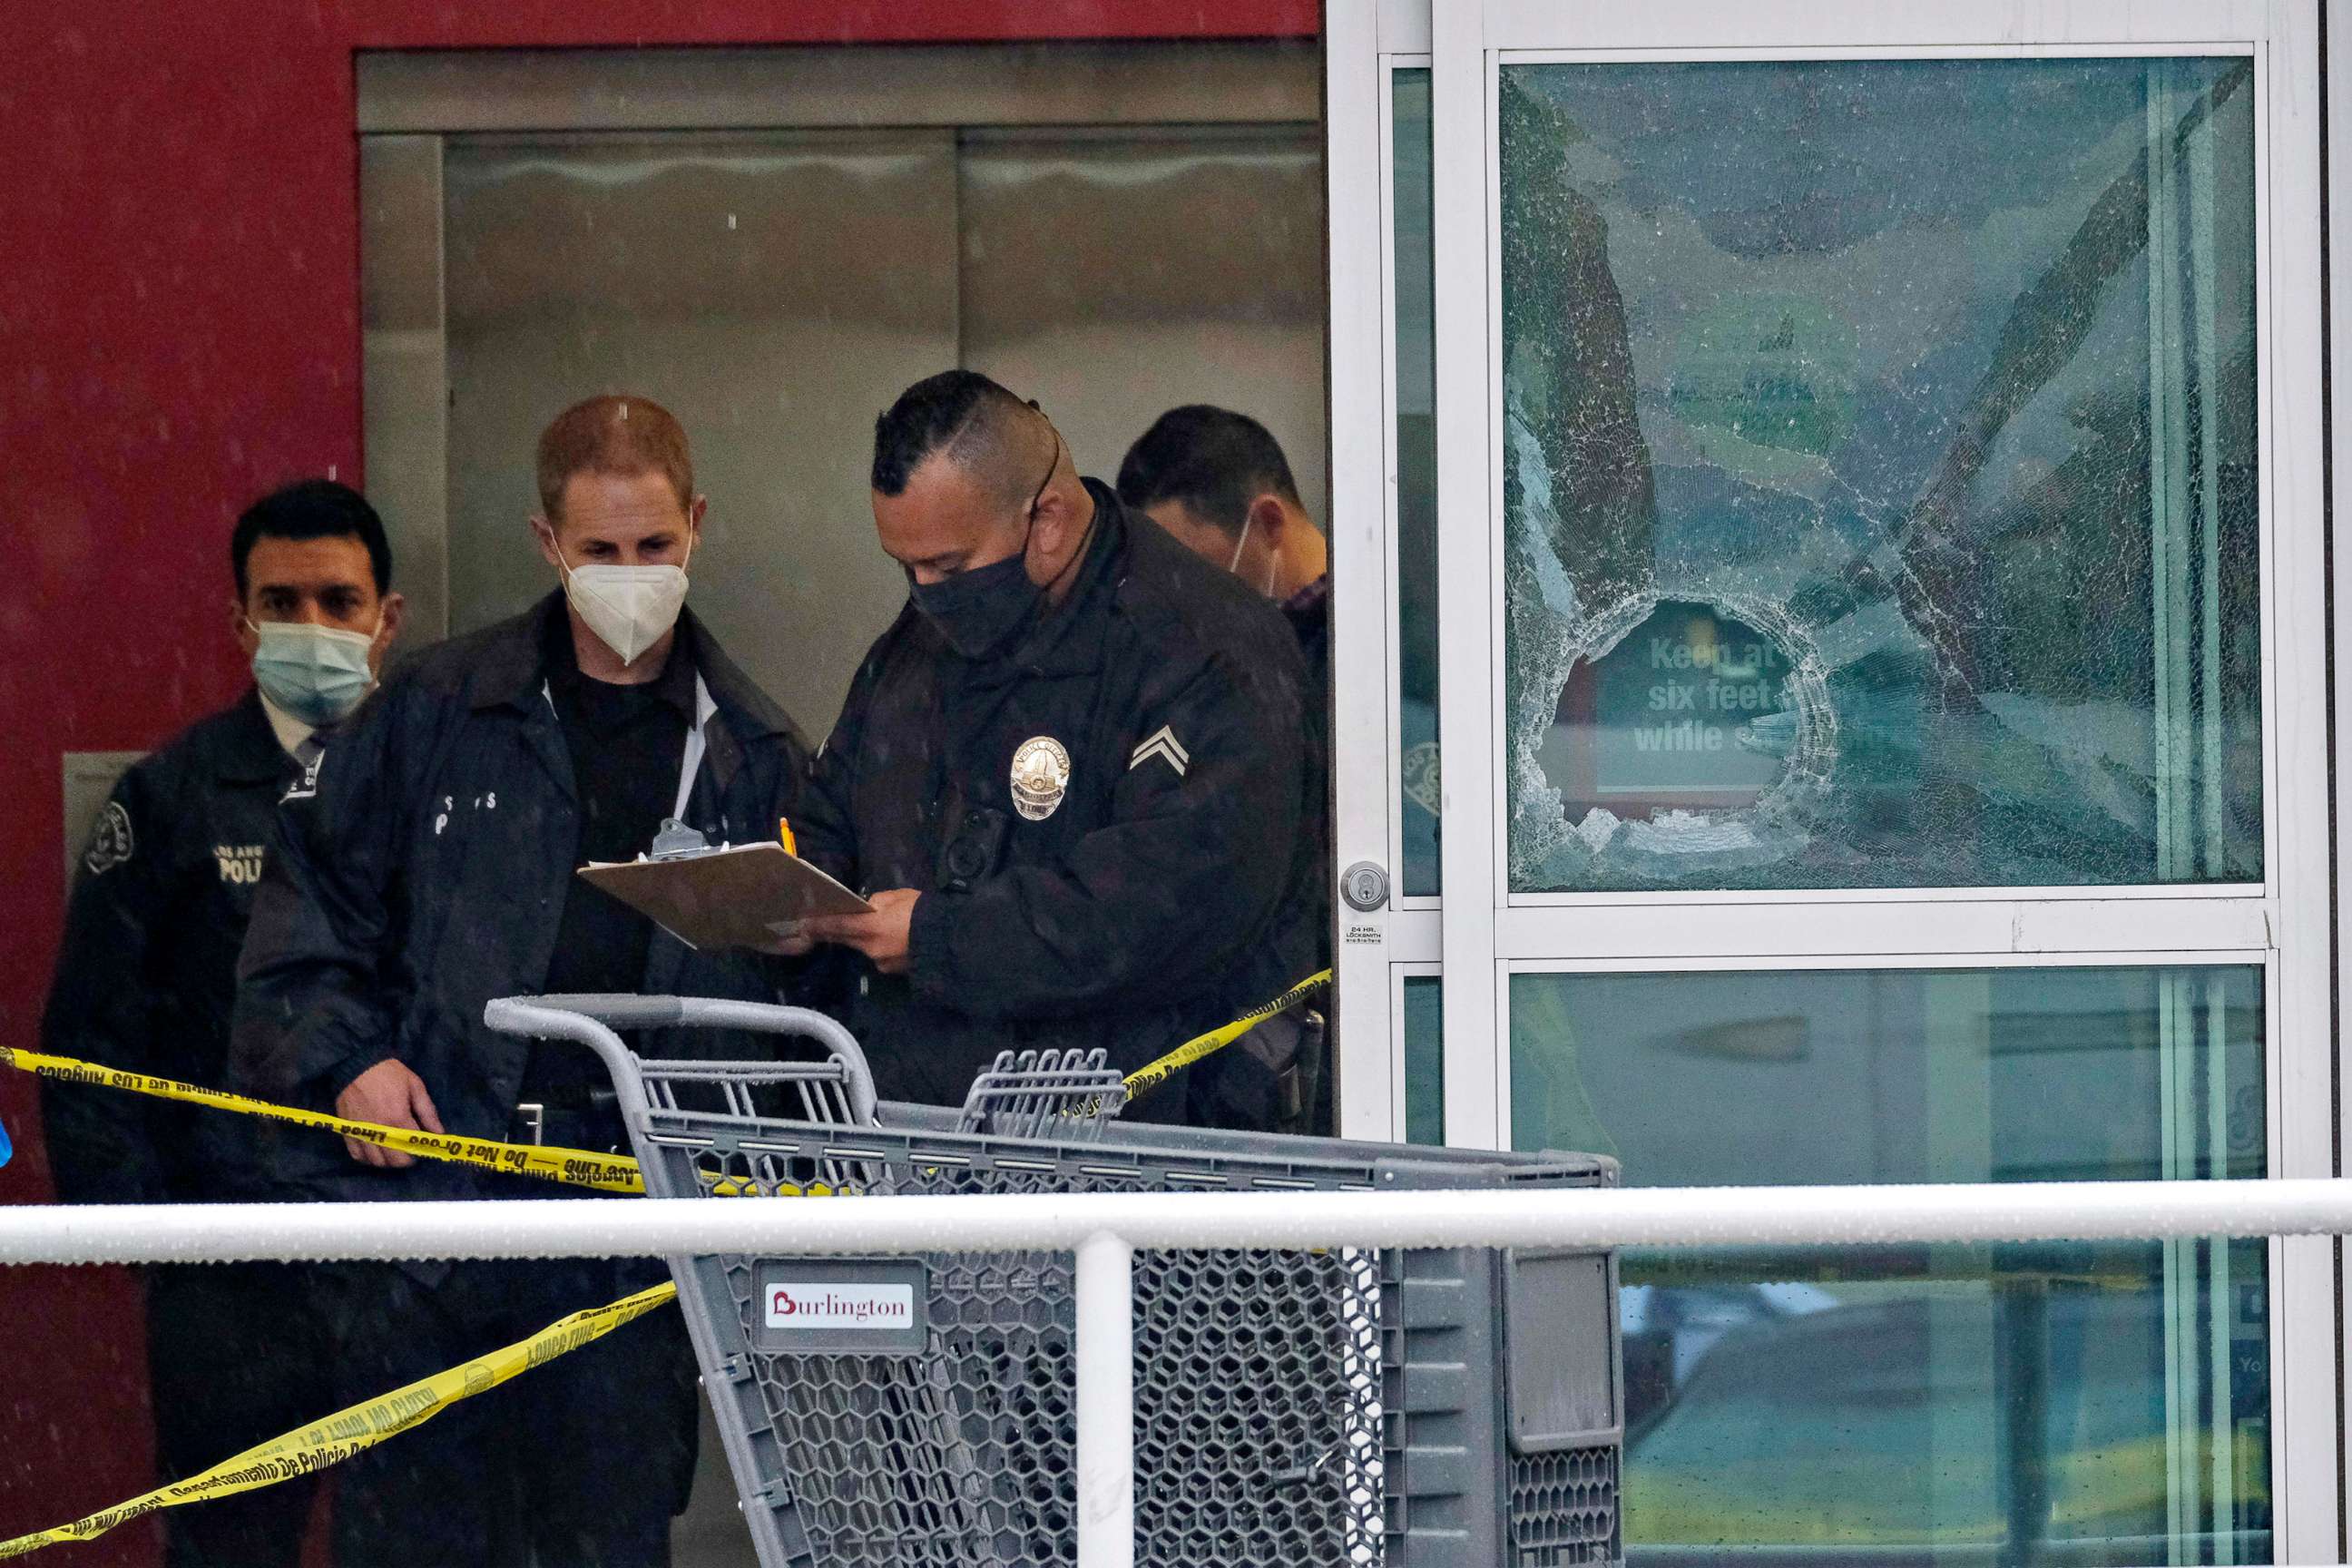 PHOTO: Police officers work near a broken glass door at the scene where two people were struck by gunfire, one of whom died, in a shooting at the Burlington coat factory store in North Hollywood, Calif., Dec. 23, 2021.